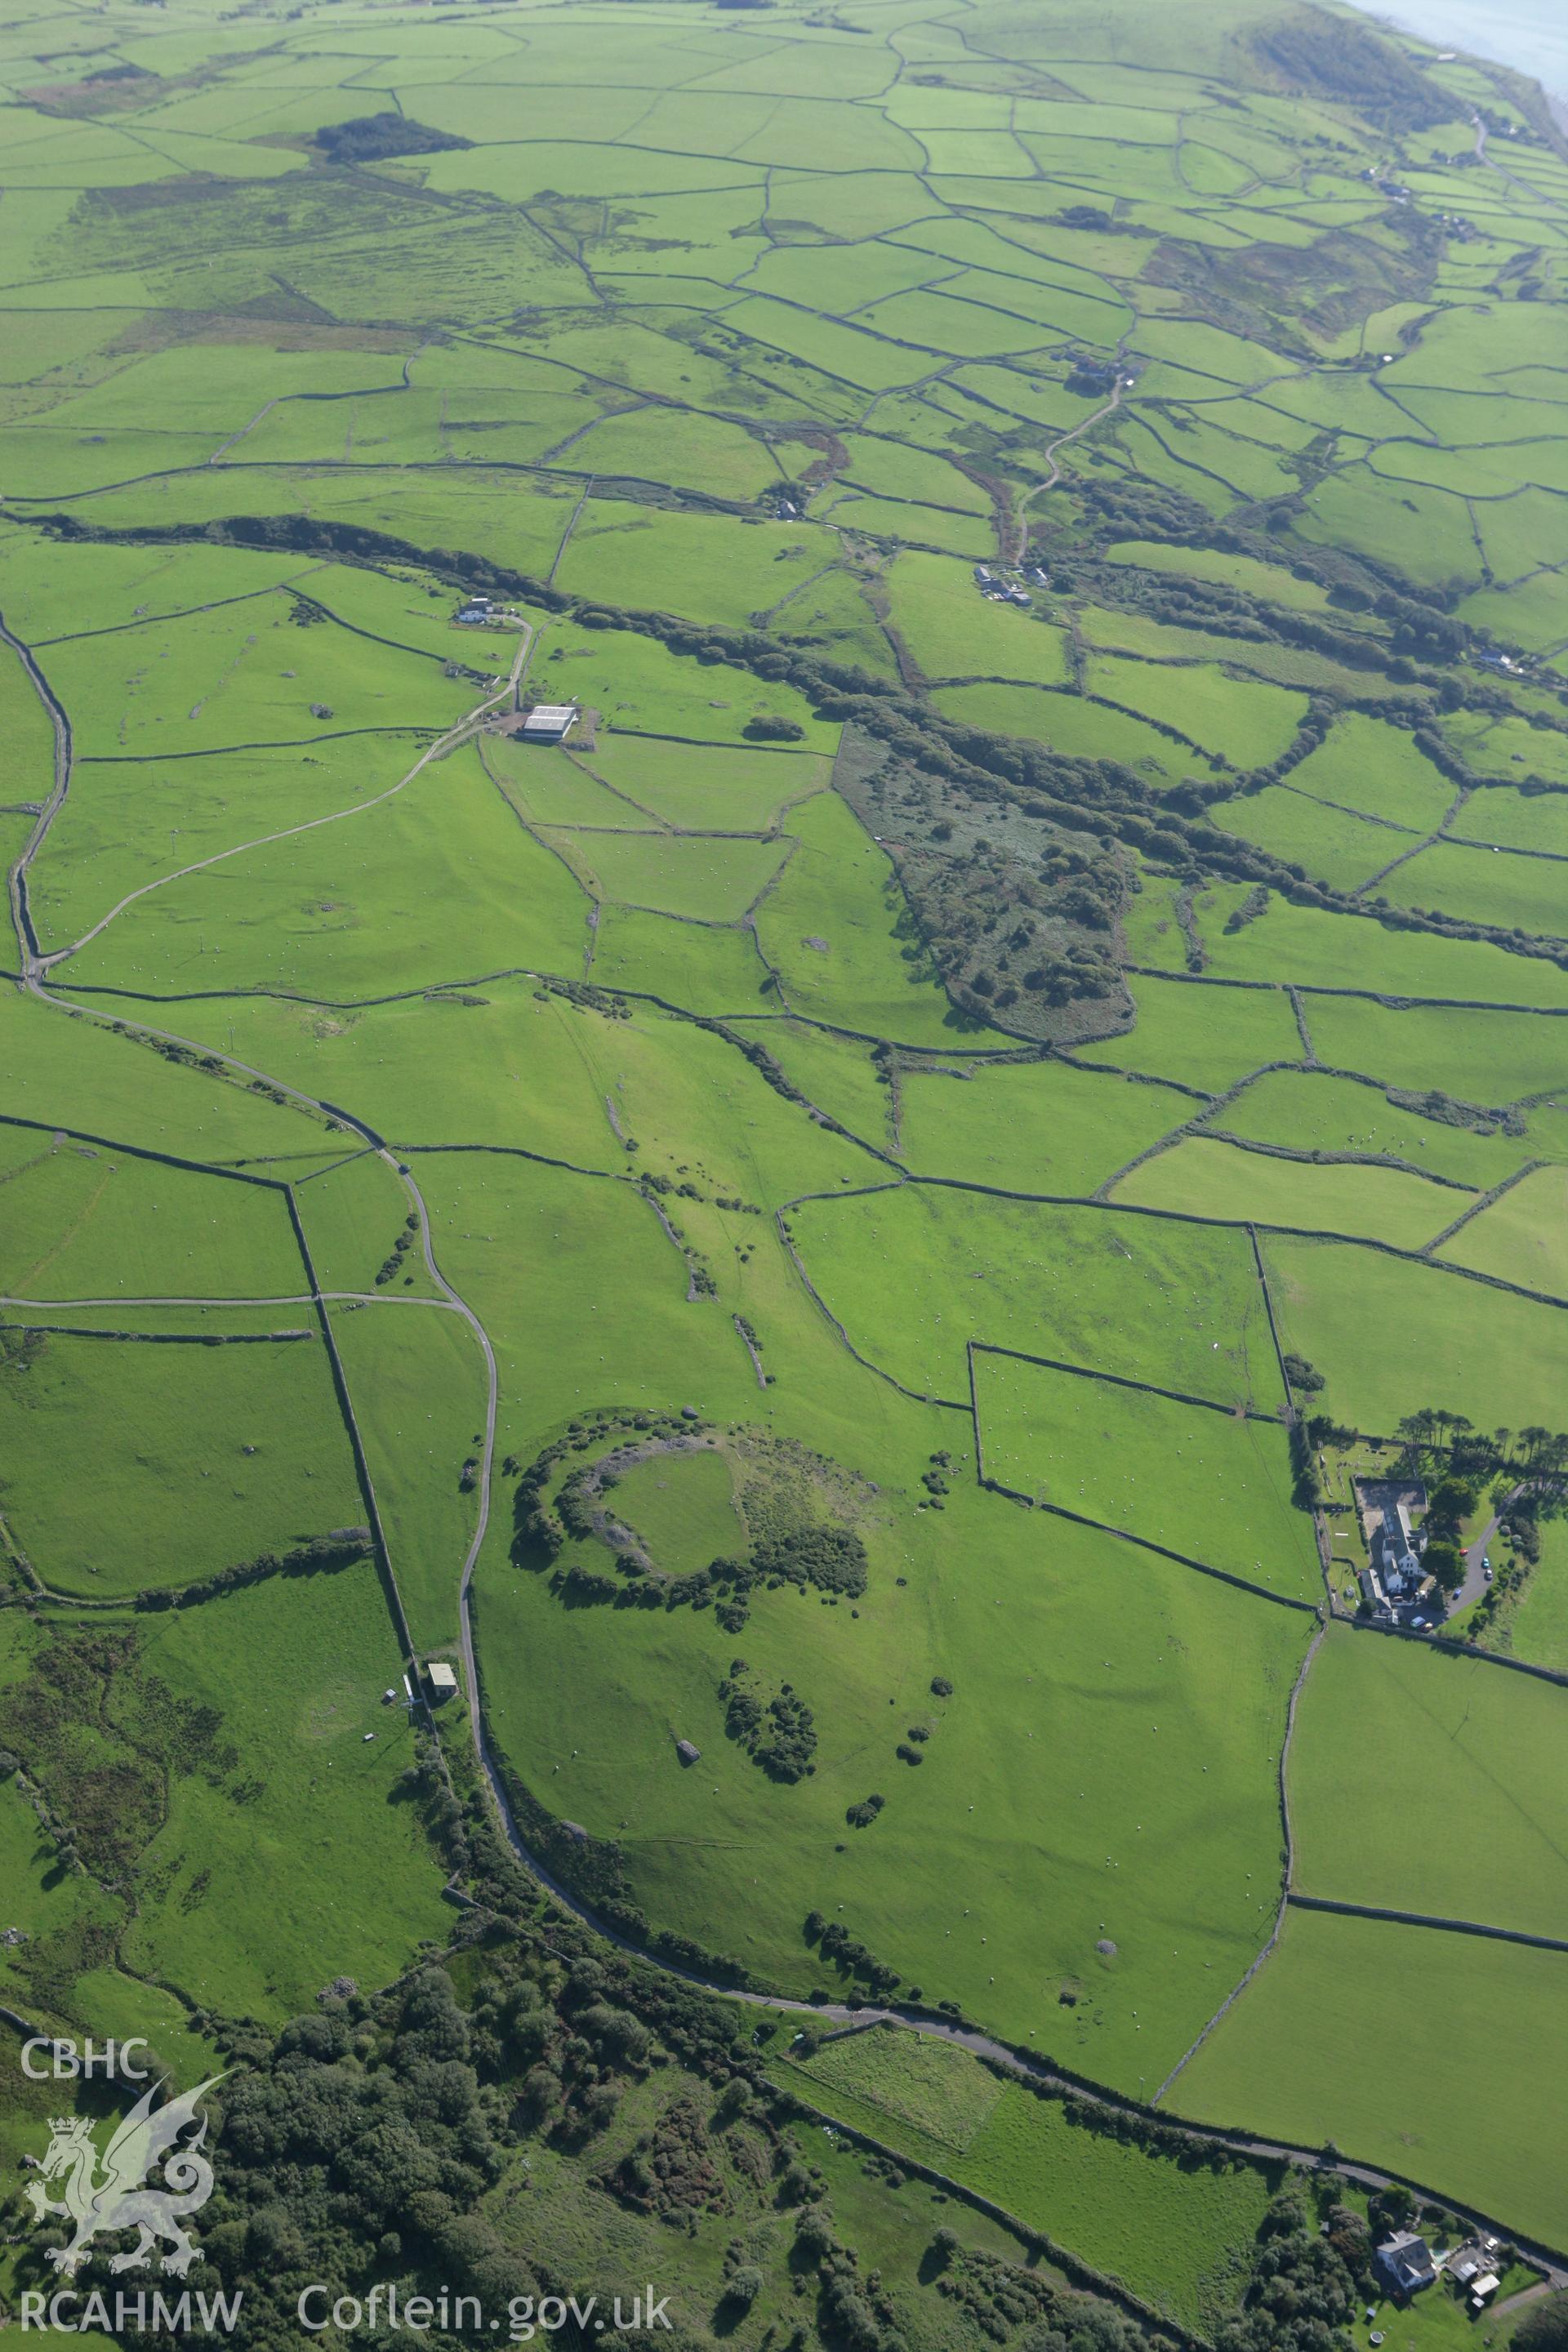 RCAHMW colour oblique aerial photograph of Castell-y-Gaer. Taken on 06 September 2007 by Toby Driver